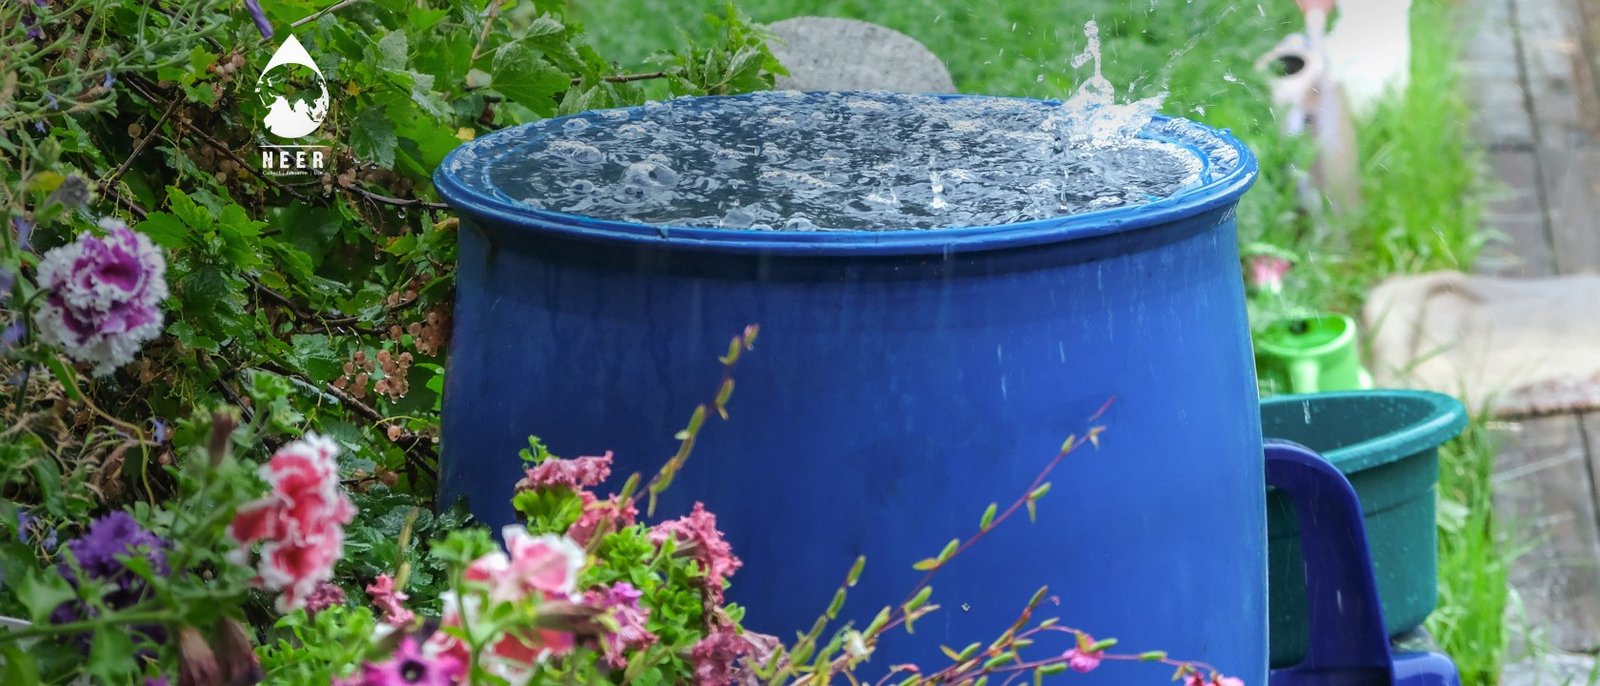 NEER-Unlock the Benefits of Rainwater Harvesting for Your Home